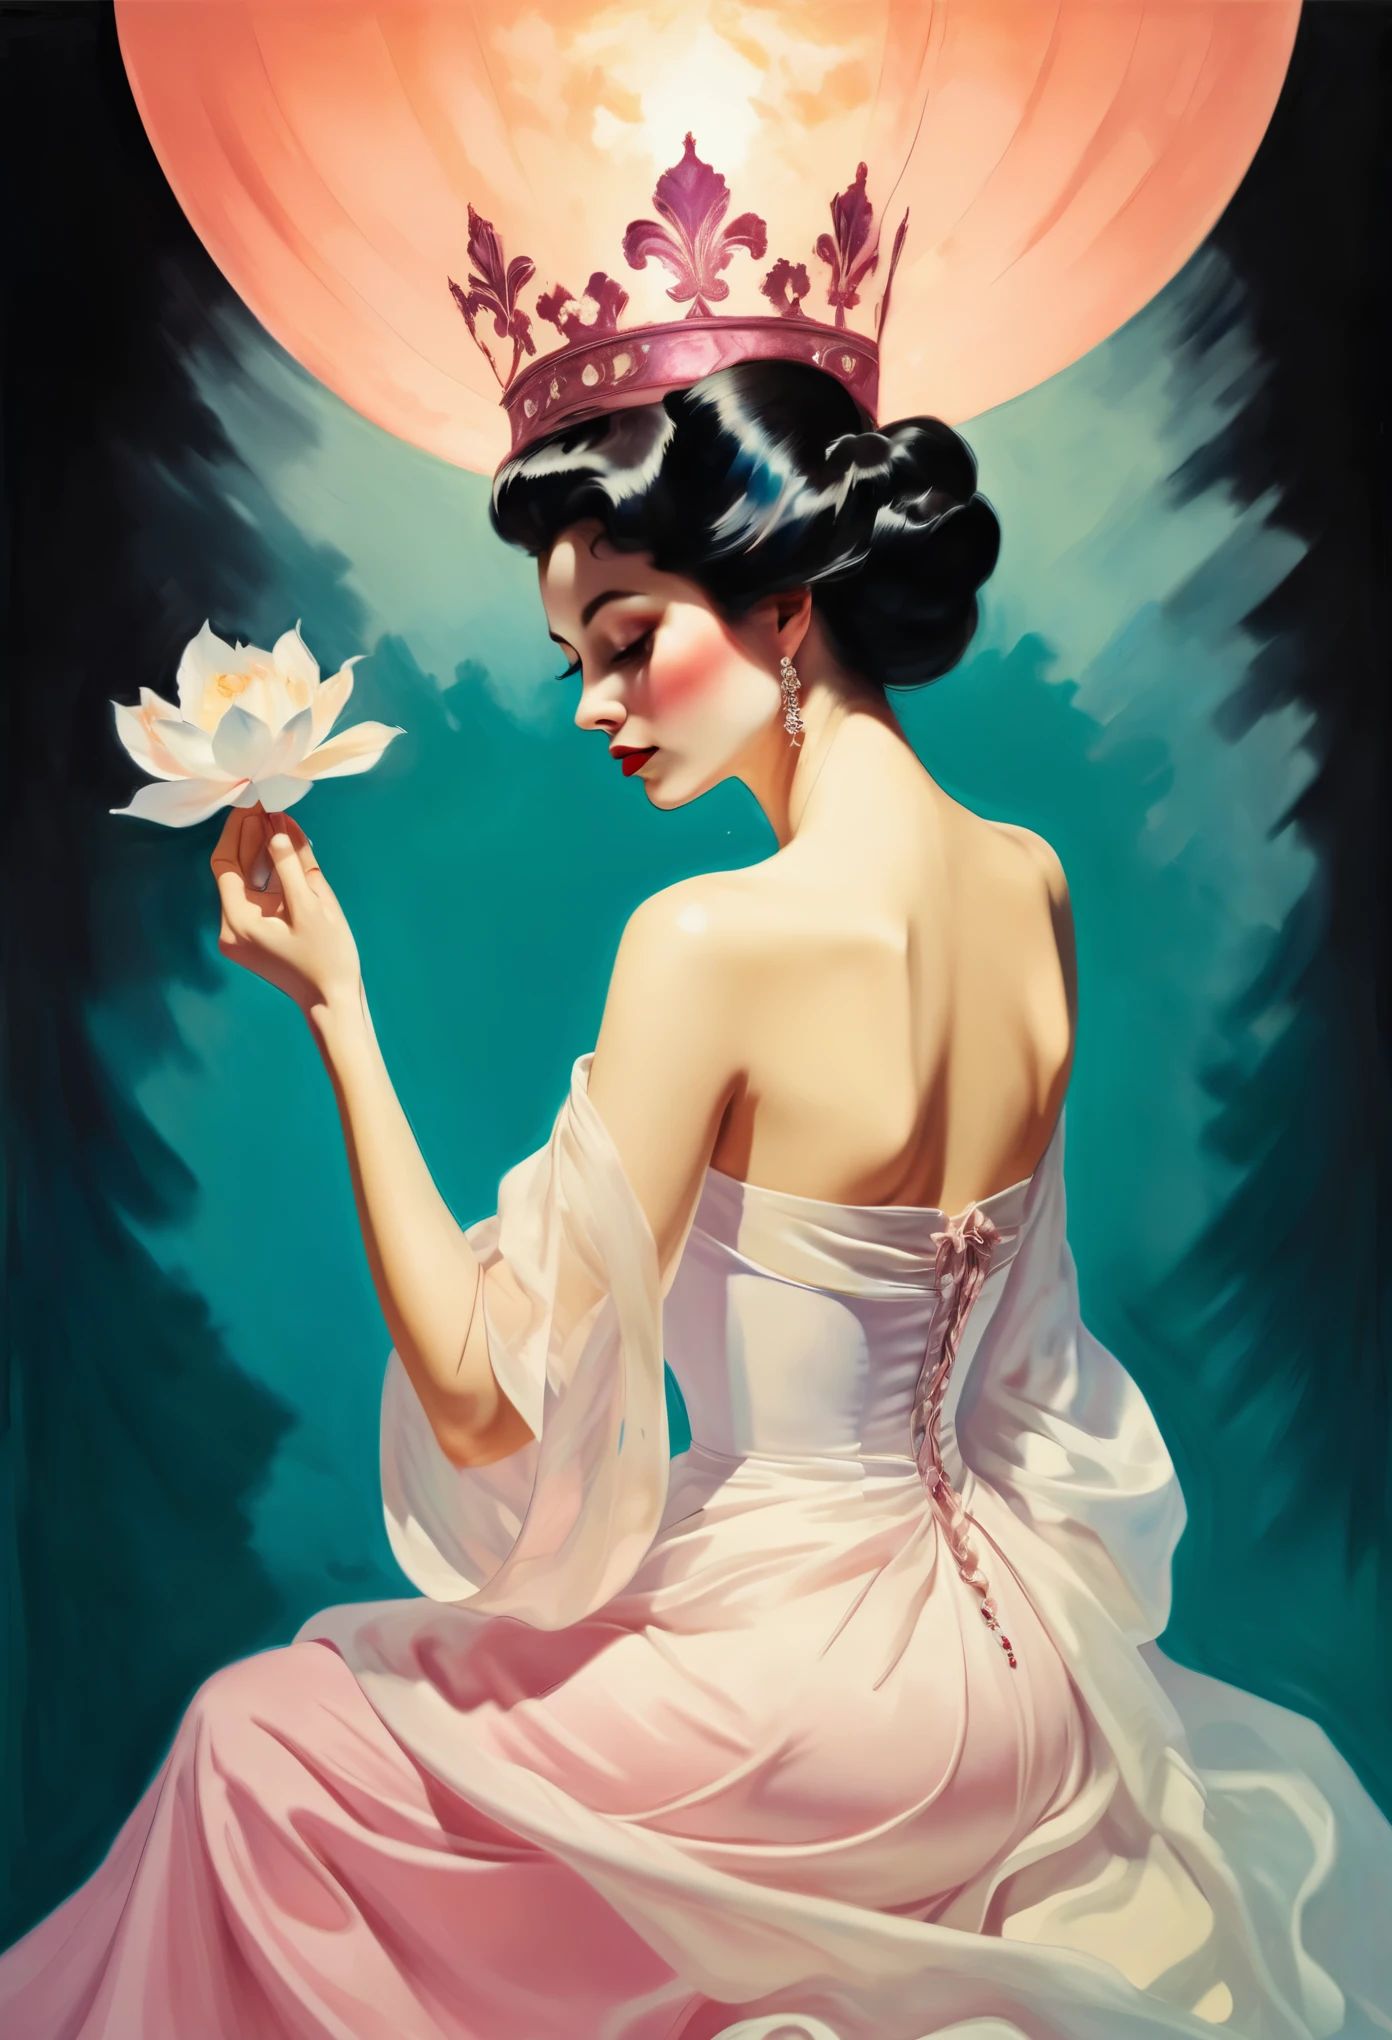 chiaroscuro technique on sensual illustration of an elegant queen , vintage ,silky dress, matte painting, by John Singer Sargent, by Harumi Hironaka, extremely soft colors, vibrant, pastel, highly detailed, digital artwork, high contrast, dramatic, refined, tonal, an intimate, seductive studio setting with a focus on sensuality and romance. Utilize soft, warm lighting that bathes the space in a gentle, inviting glow. Incorporate luxurious fabrics, plush furnishings, and a touch of decadence to evoke an opulent ambiance. The scene should exude an air of serenity and anticipation, inviting the viewer into a sensual and romantic space